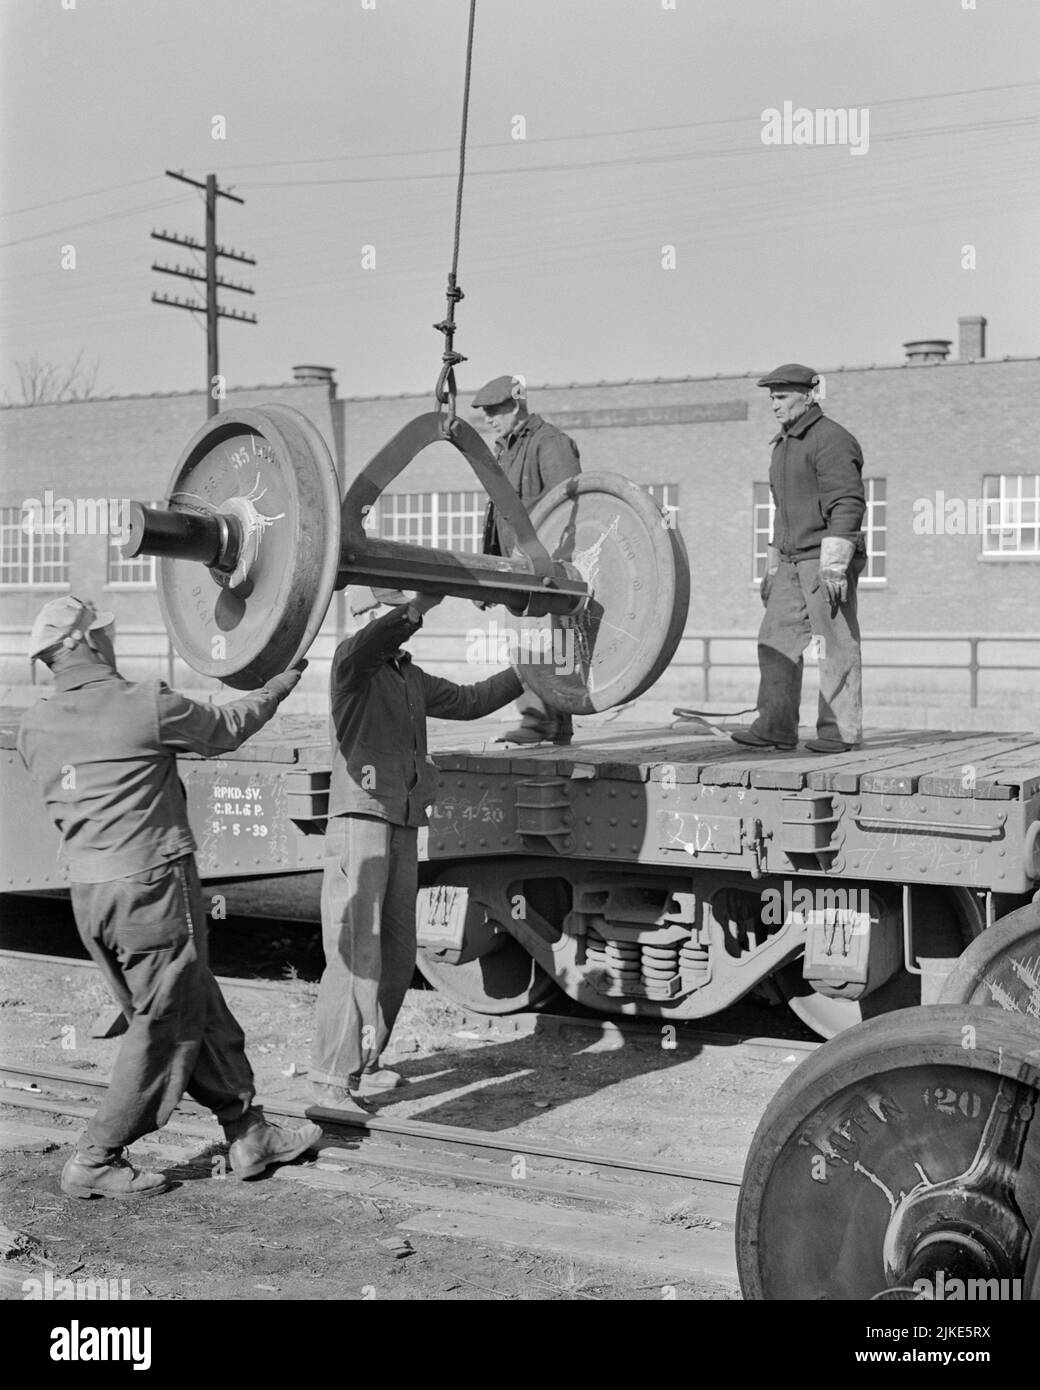 1930s MEN LOADING NEW RAILROAD CAR WHEELS ONTO FLATBED CAR PEORIA ILLINOIS USA - i254 HAR001 HARS NORTH AMERICA SERVICES LOADING NORTH AMERICAN RAIL SKILL OCCUPATION STRUCTURE SKILLS BUILD BASE CAREERS RECOVERY LABOR BETTER EMPLOYMENT OCCUPATIONS ONTO INFRASTRUCTURE PEORIA RAILROADS EMPLOYEE FACILITIES COOPERATION CORE ILLINOIS MID-ADULT MID-ADULT MAN SYSTEMS BLACK AND WHITE CAUCASIAN ETHNICITY ECONOMY FLATBED HAR001 IL LABORING OLD FASHIONED Stock Photo